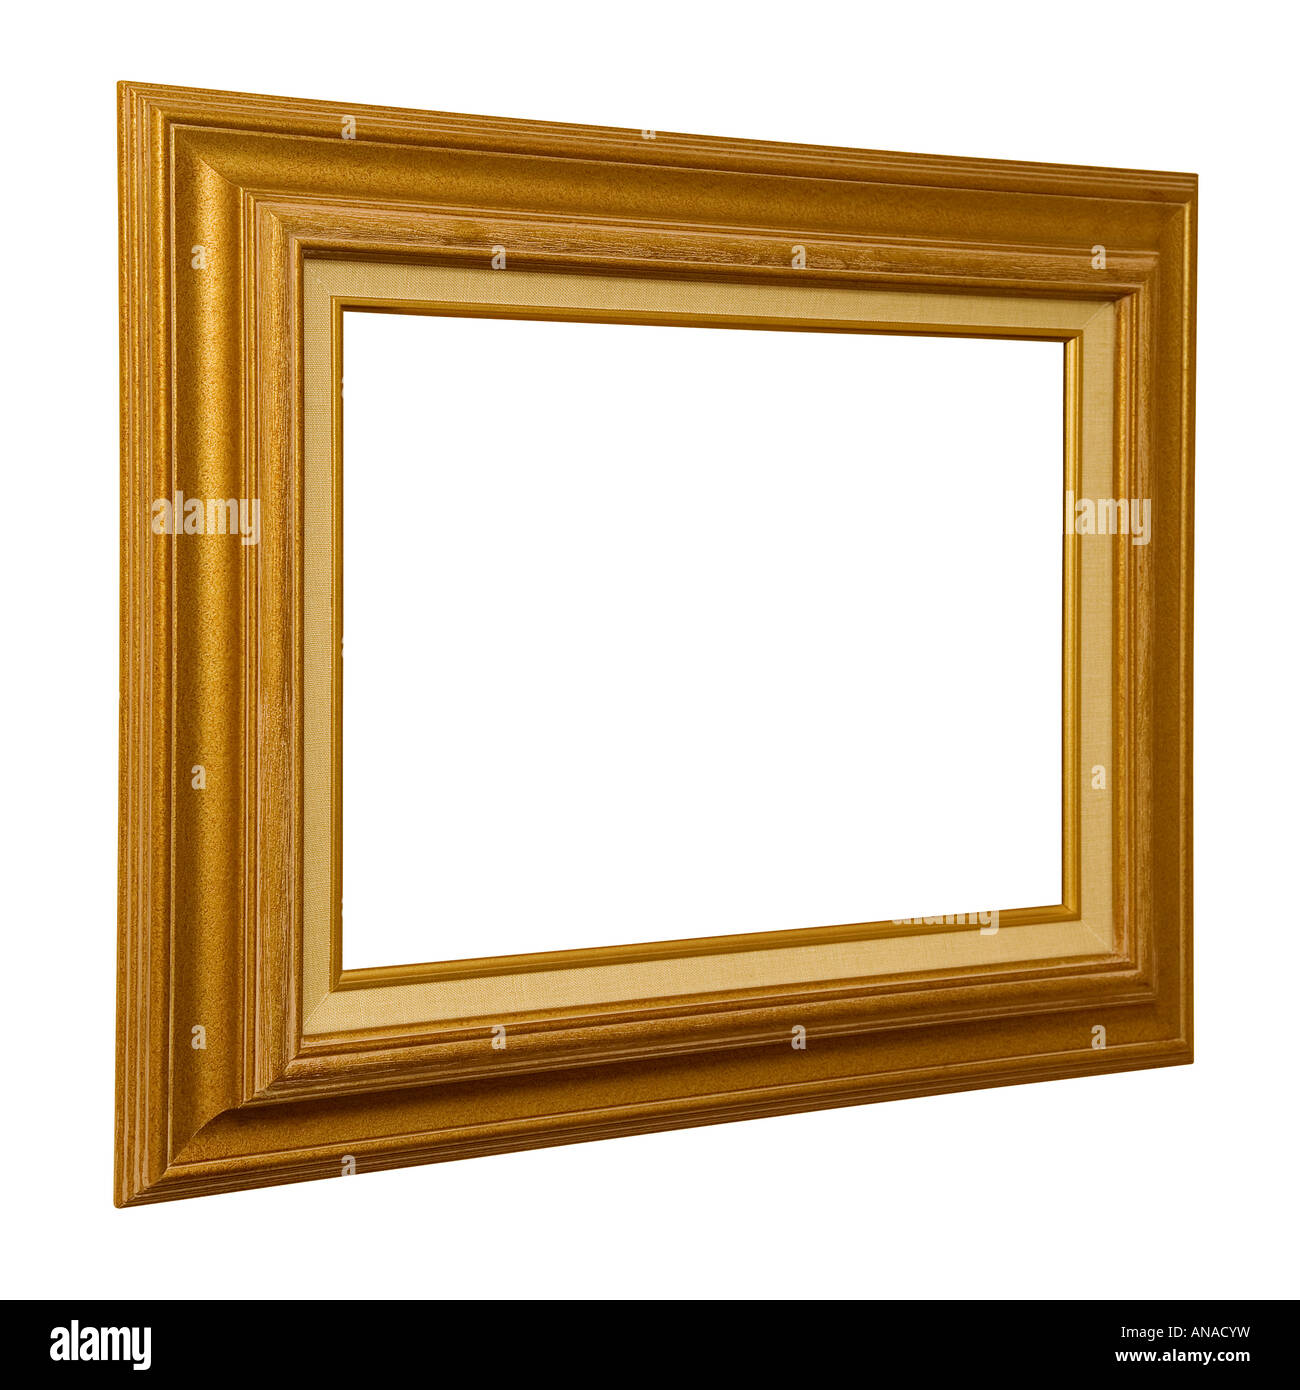 Gold coloured Picture frame viewed from an angle Stock Photo